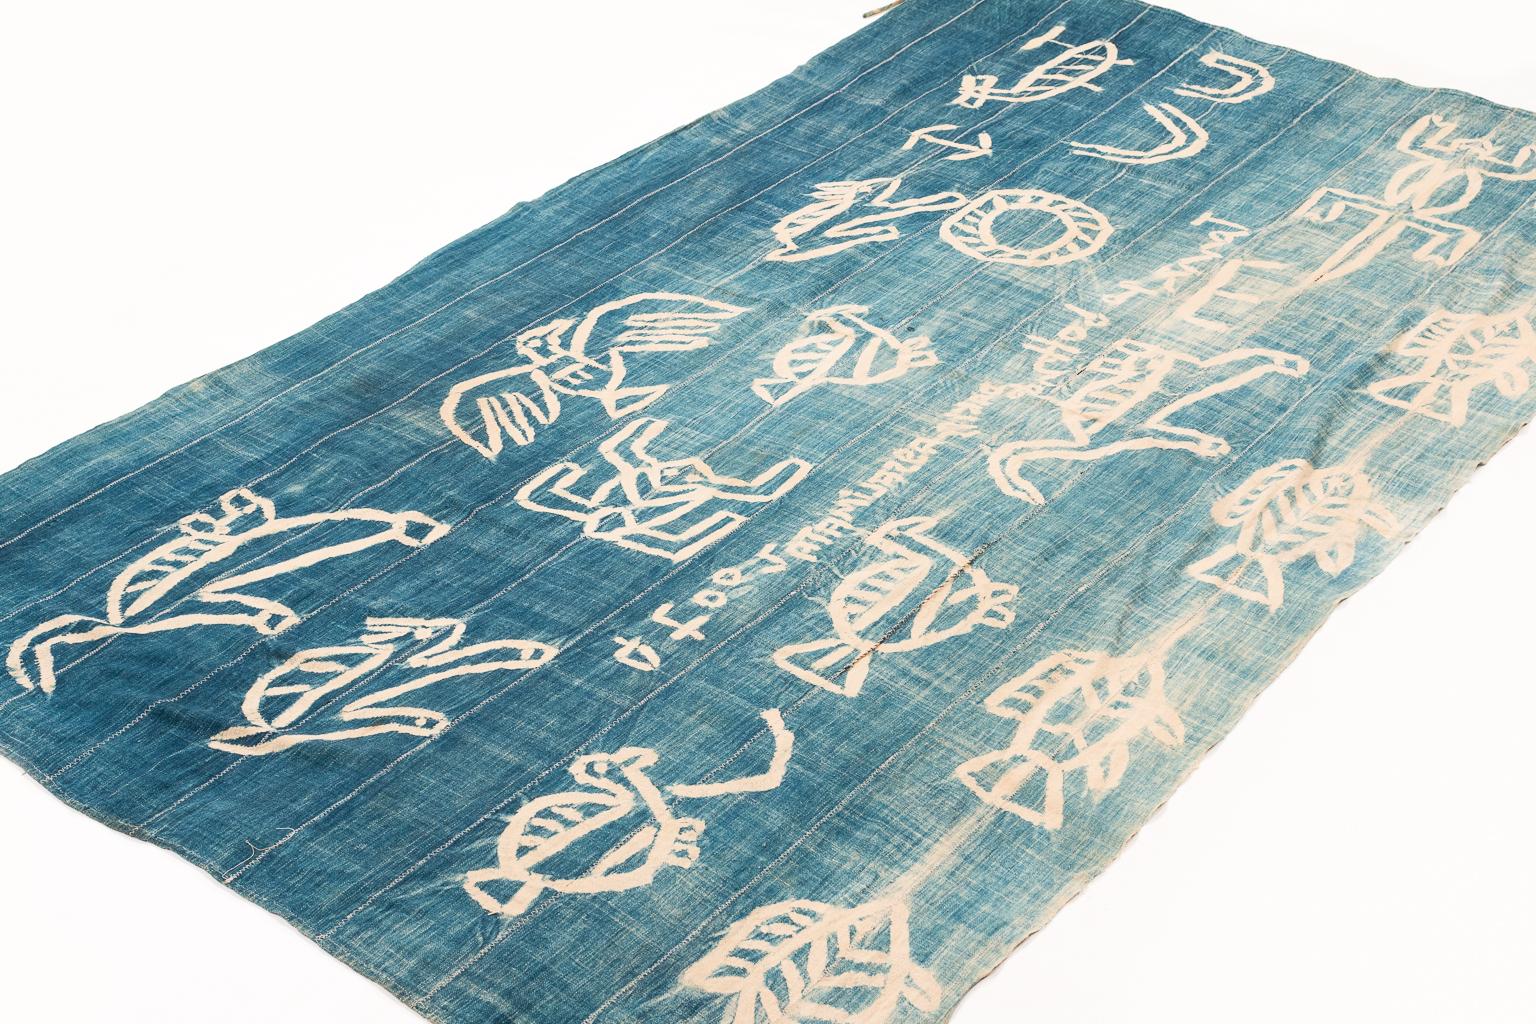 A resistance dye technique, similar to a hollandaise wax process, was used to create the animal motifs on this vintage tribal art blue and white ceremonial textile wrap. The gradient on the indigo shows beautiful variation. The cotton is very high